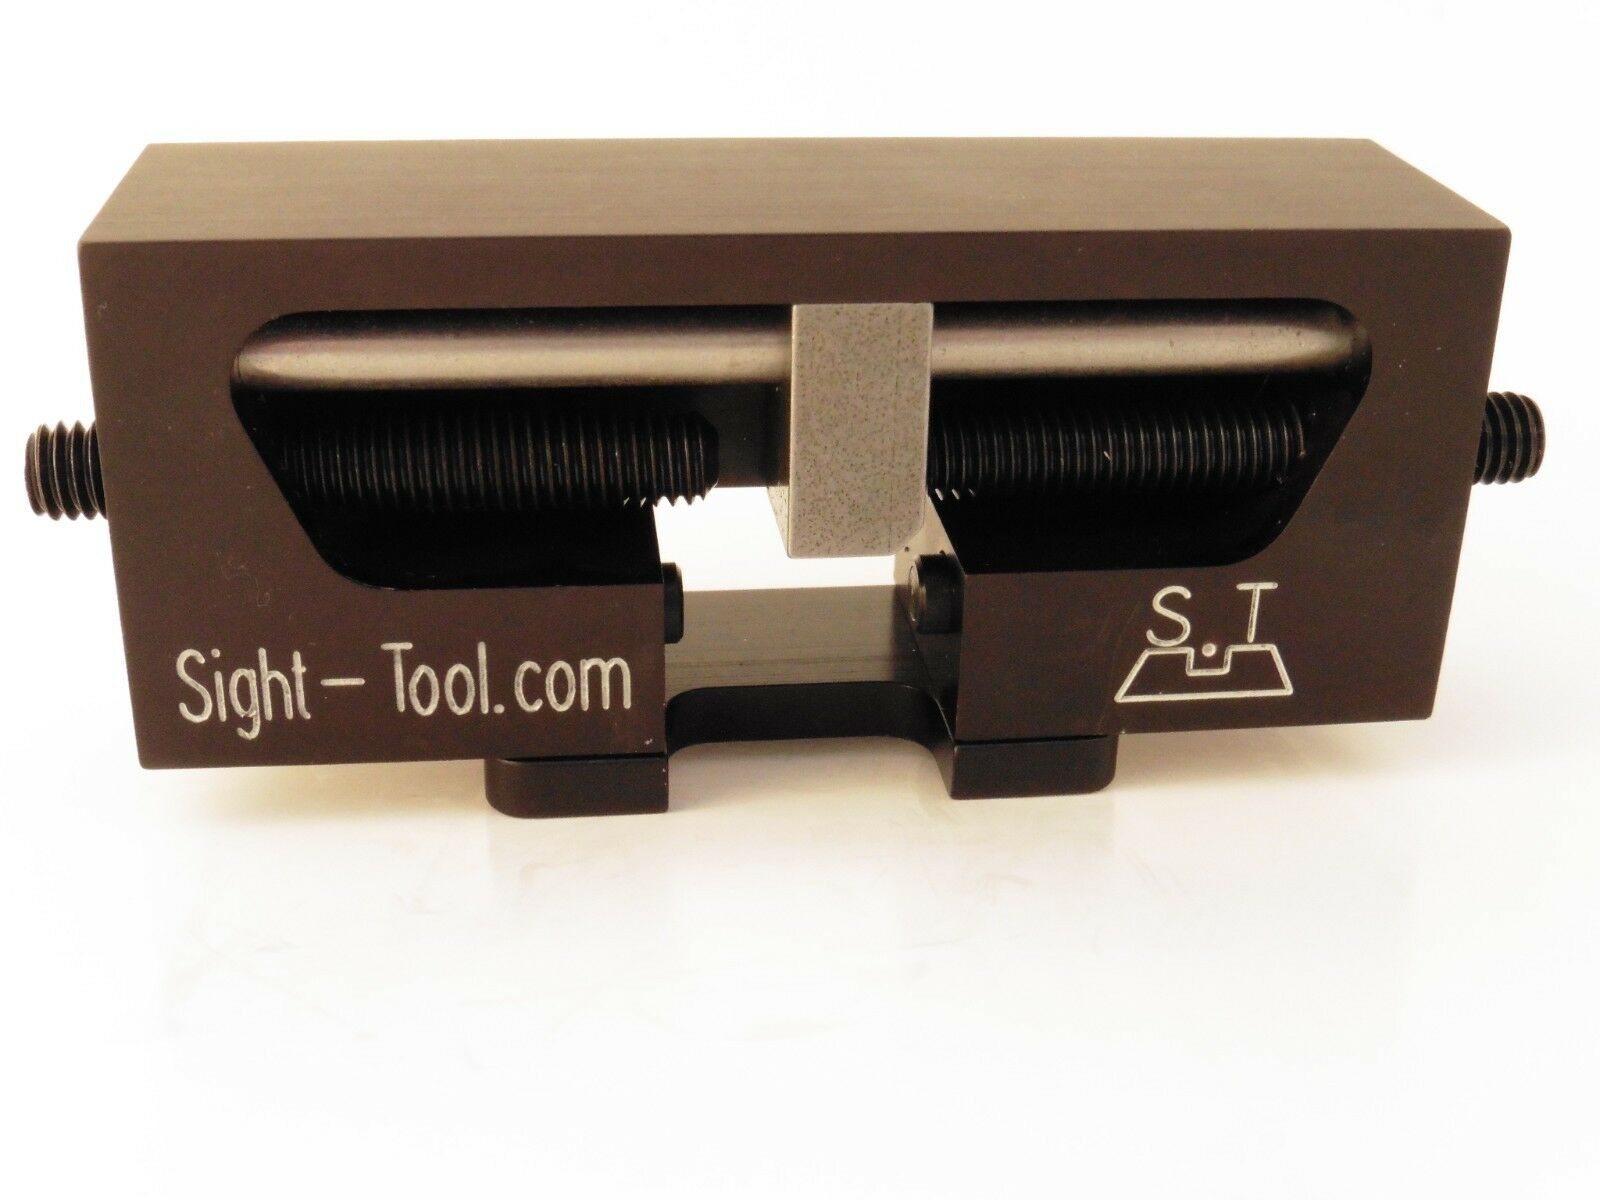 Handgun Sight Pusher Tool Universal for 1911 glock  sig  springfield  and others